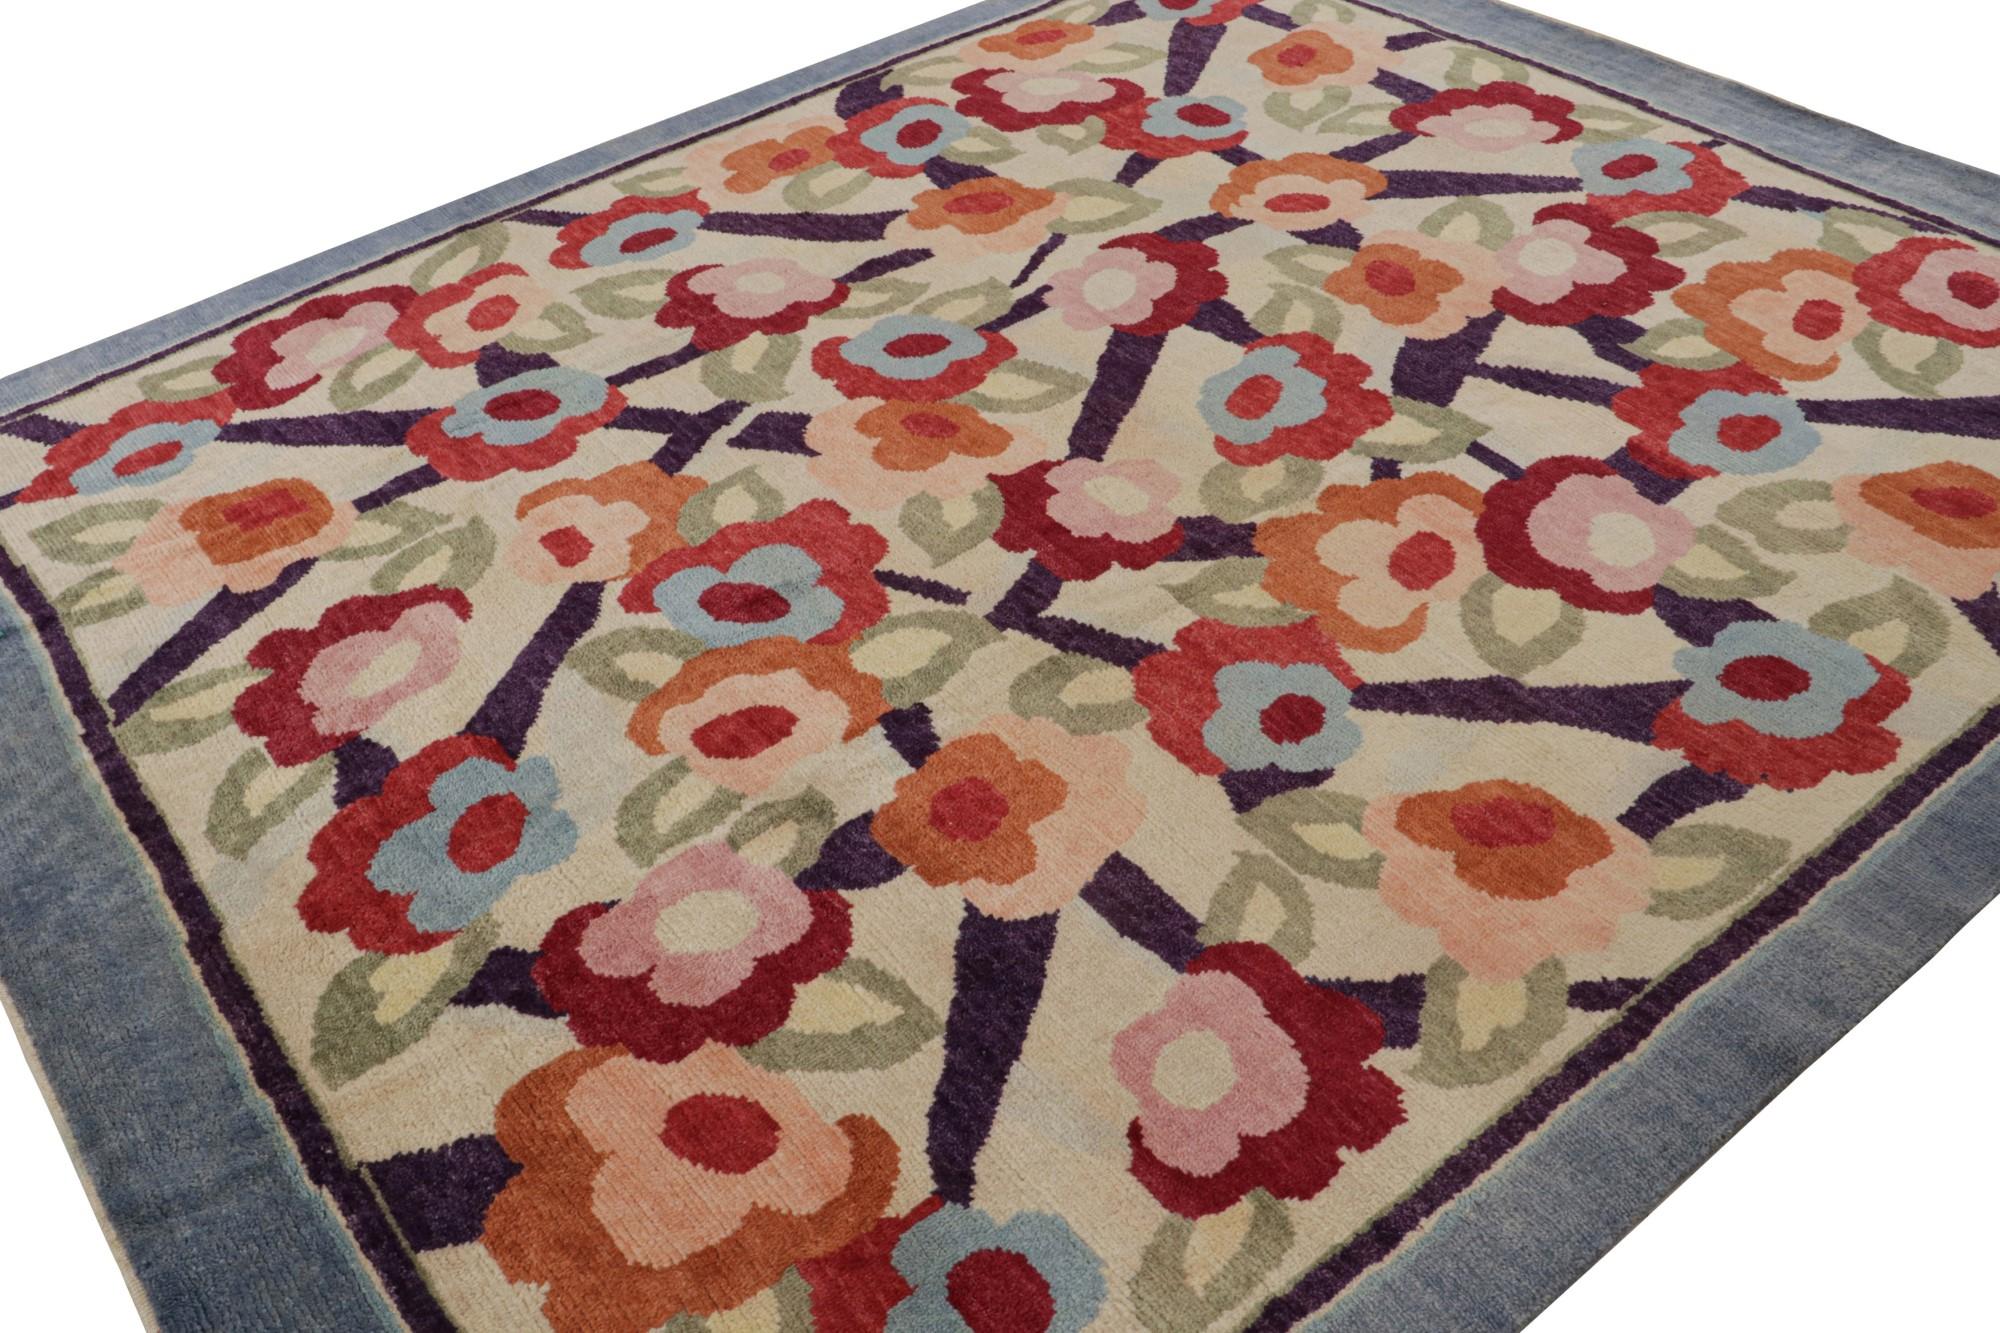 This 8x10 ode to French Art Deco rugs is the next addition to Rug & Kilim’s newly inspired Deco Collection. Hand-knotted in wool.

Further on the Design:  

This piece boasts the Deco style of the 1920s with luscious polychromatic florals in